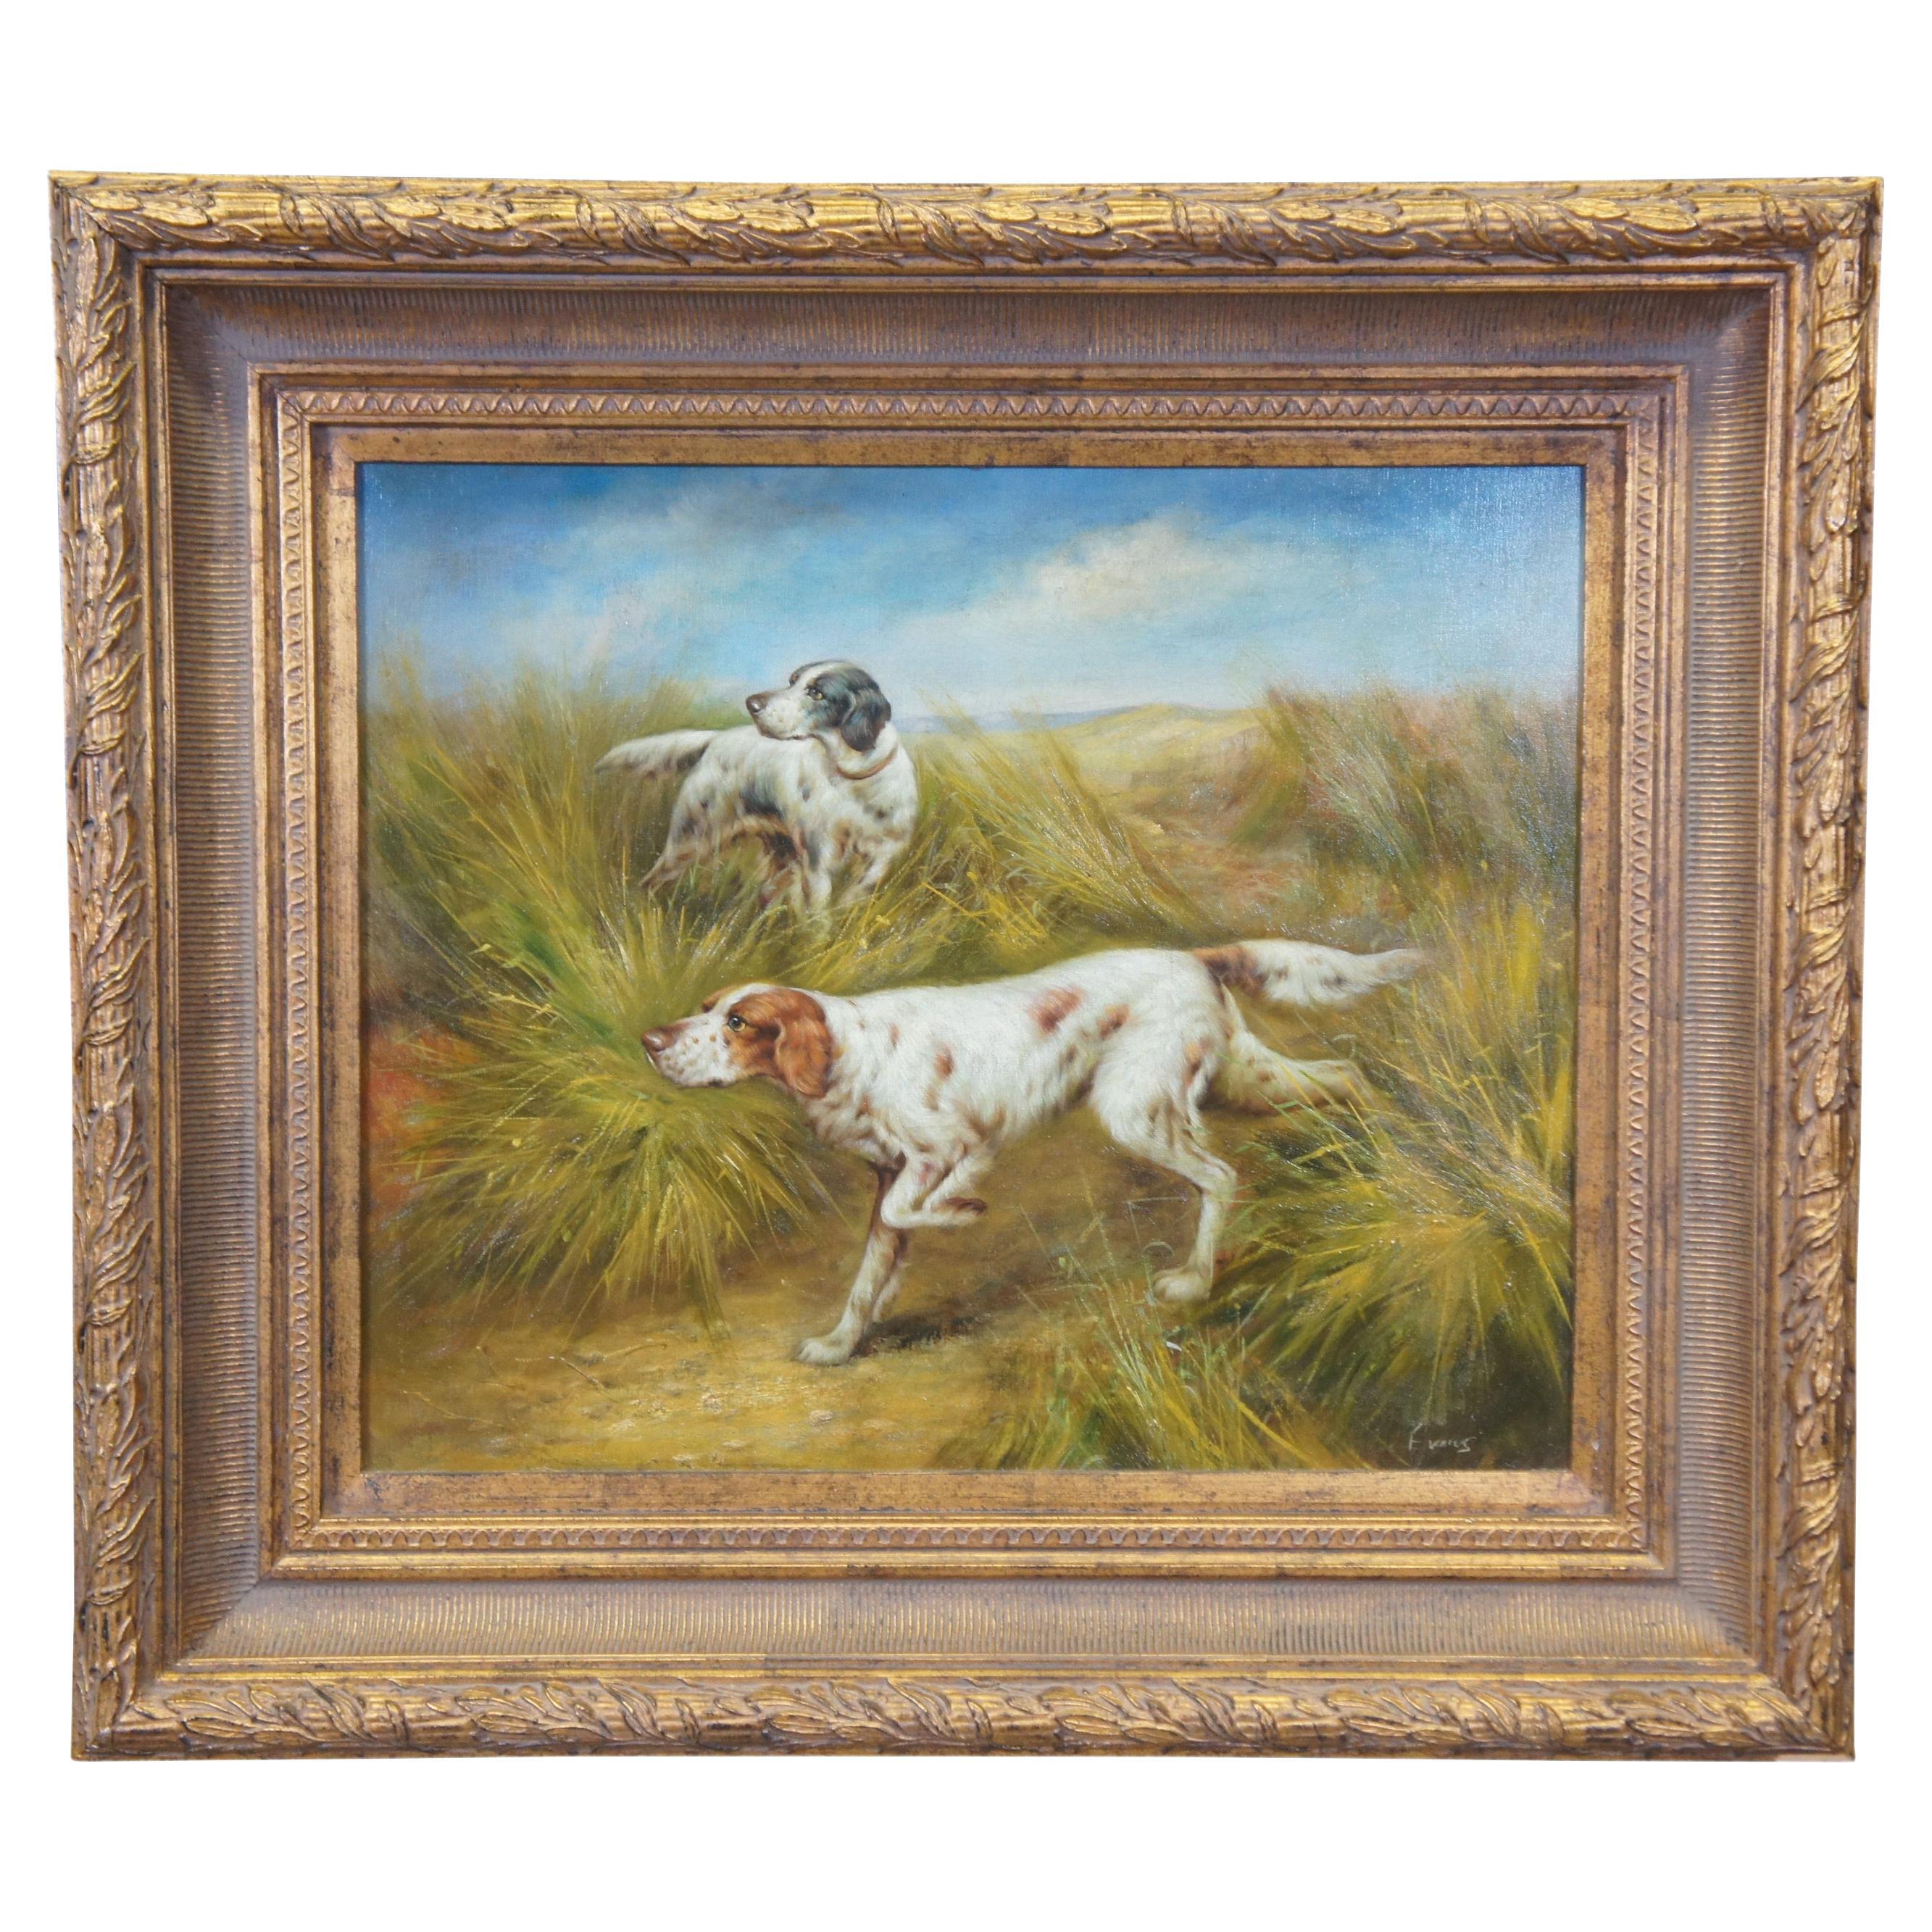 Evans Pointer Hunting Dogs Landscape Portrait Oil Painting on Canvas 34"